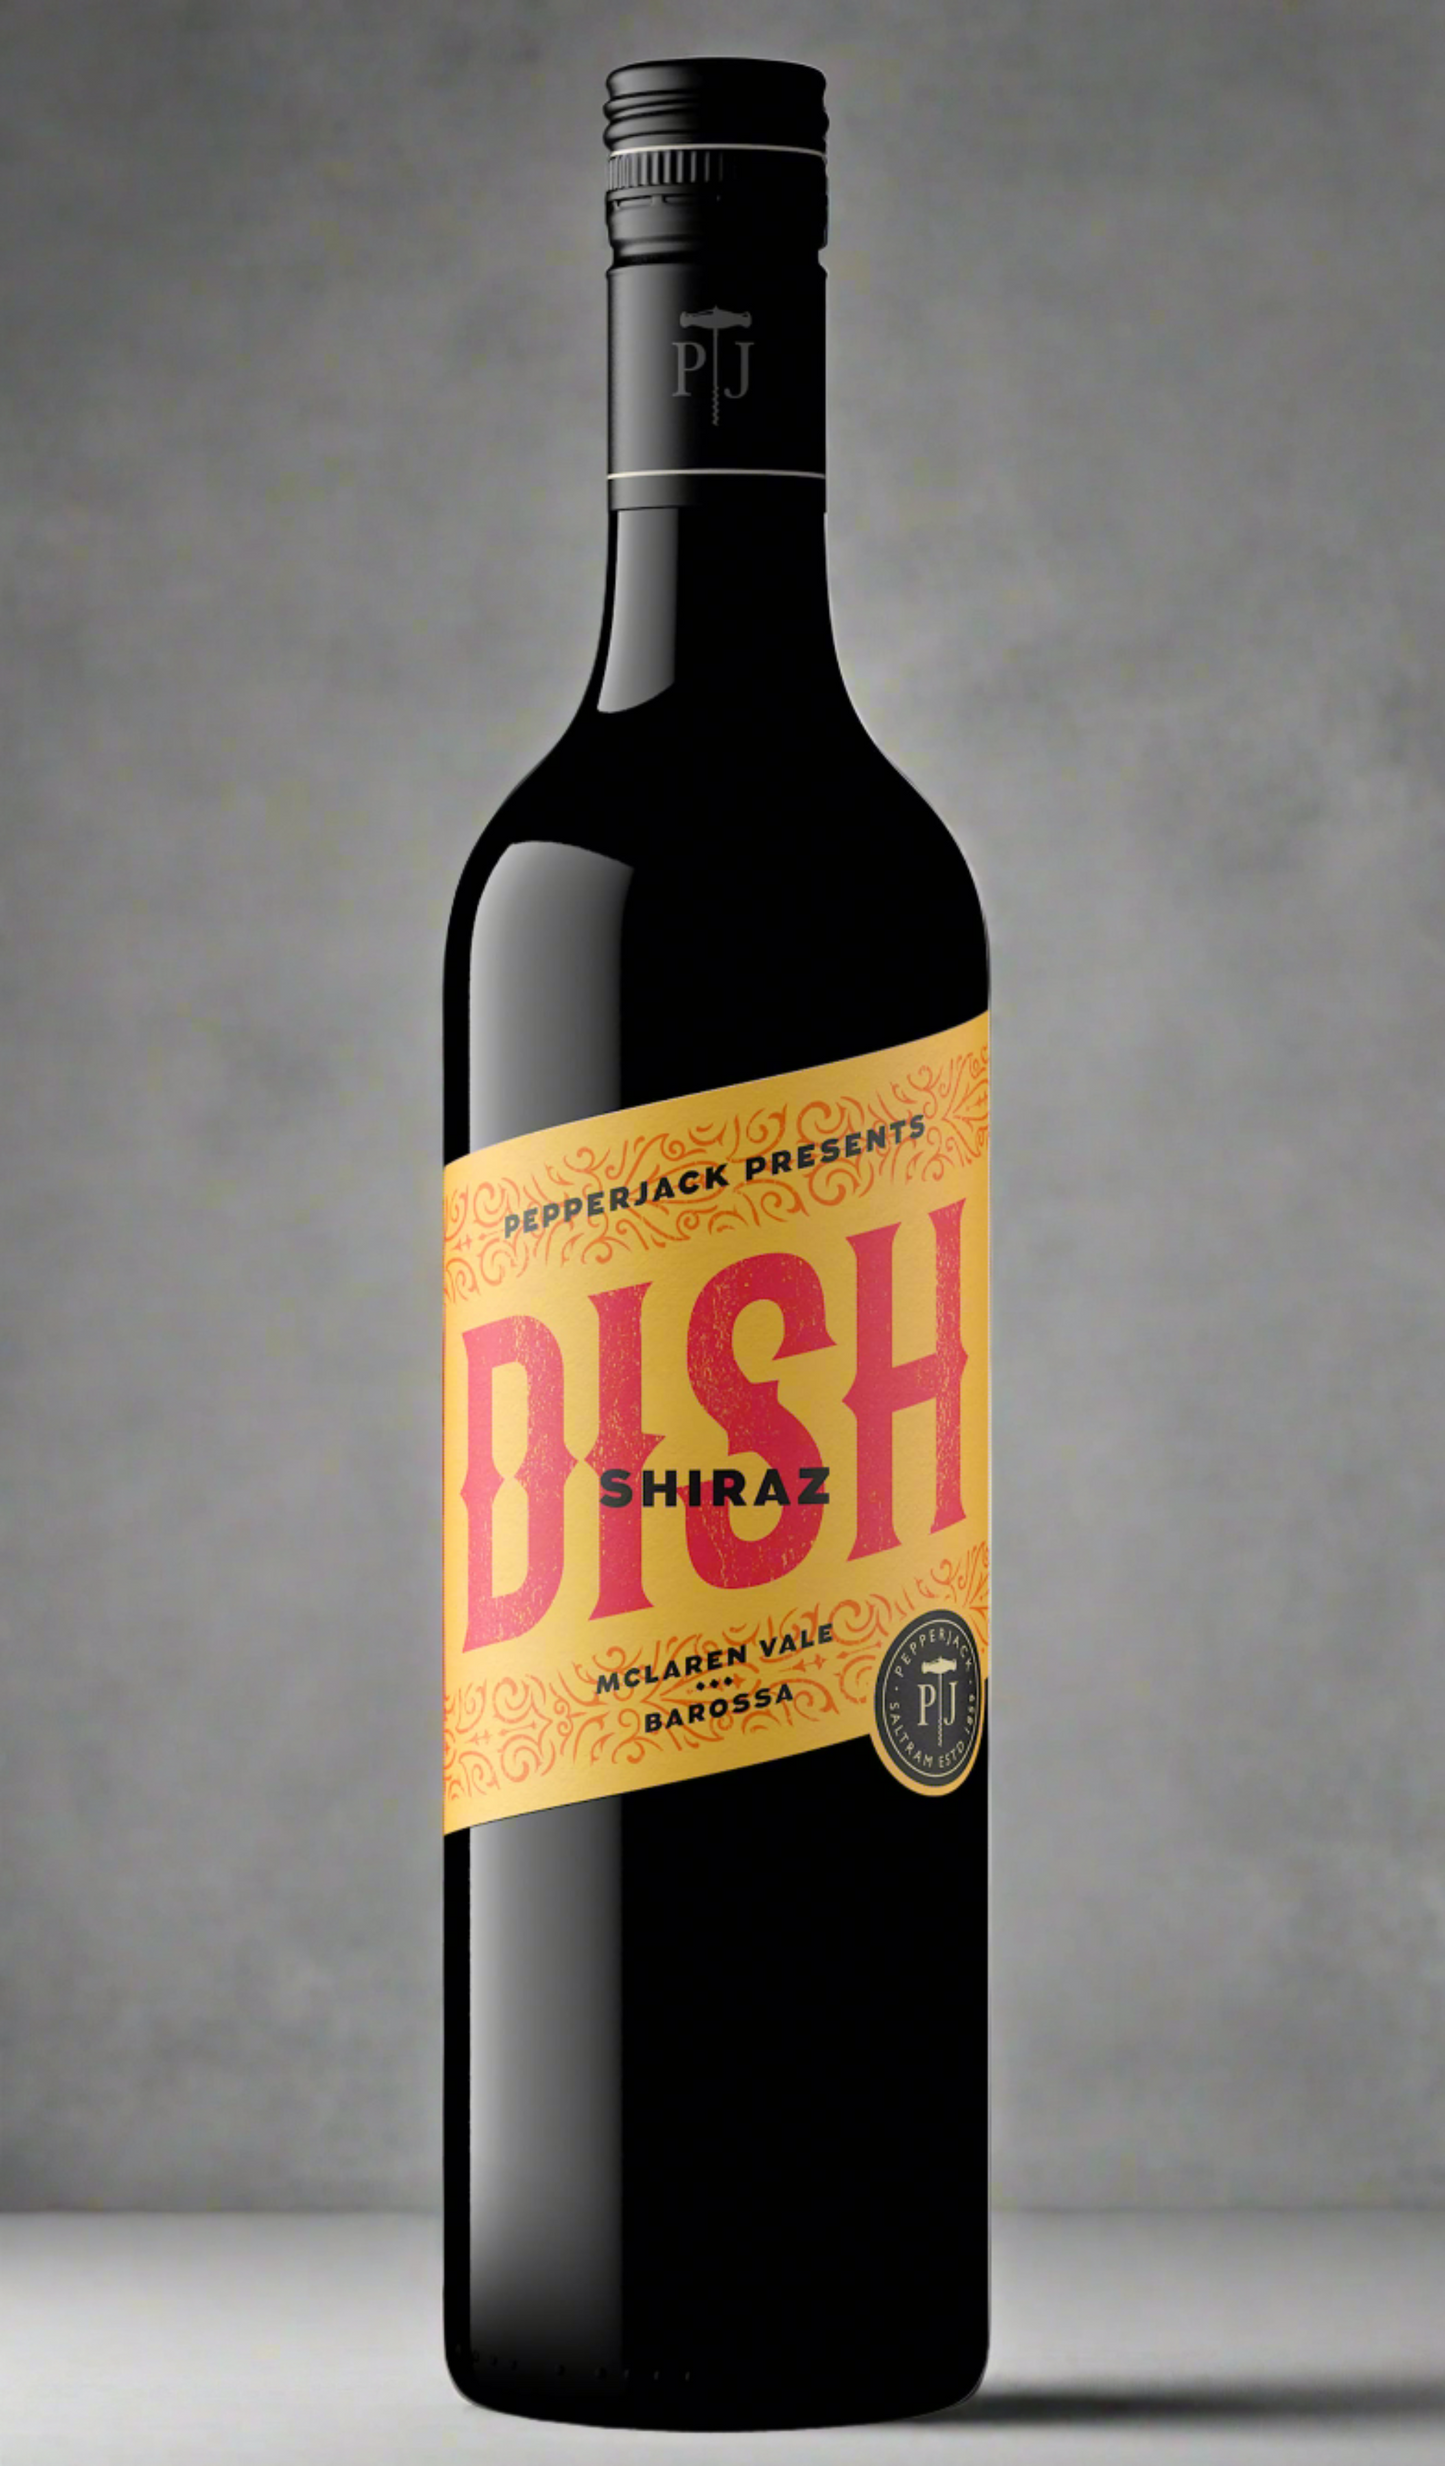 Find out more, explore the range and purchase Pepperjack Dish Shiraz 2023 (McLaren Vale & Barossa Valley) available online and in-store at Wine Sellers Direct - Australia's independent liquor specialists.